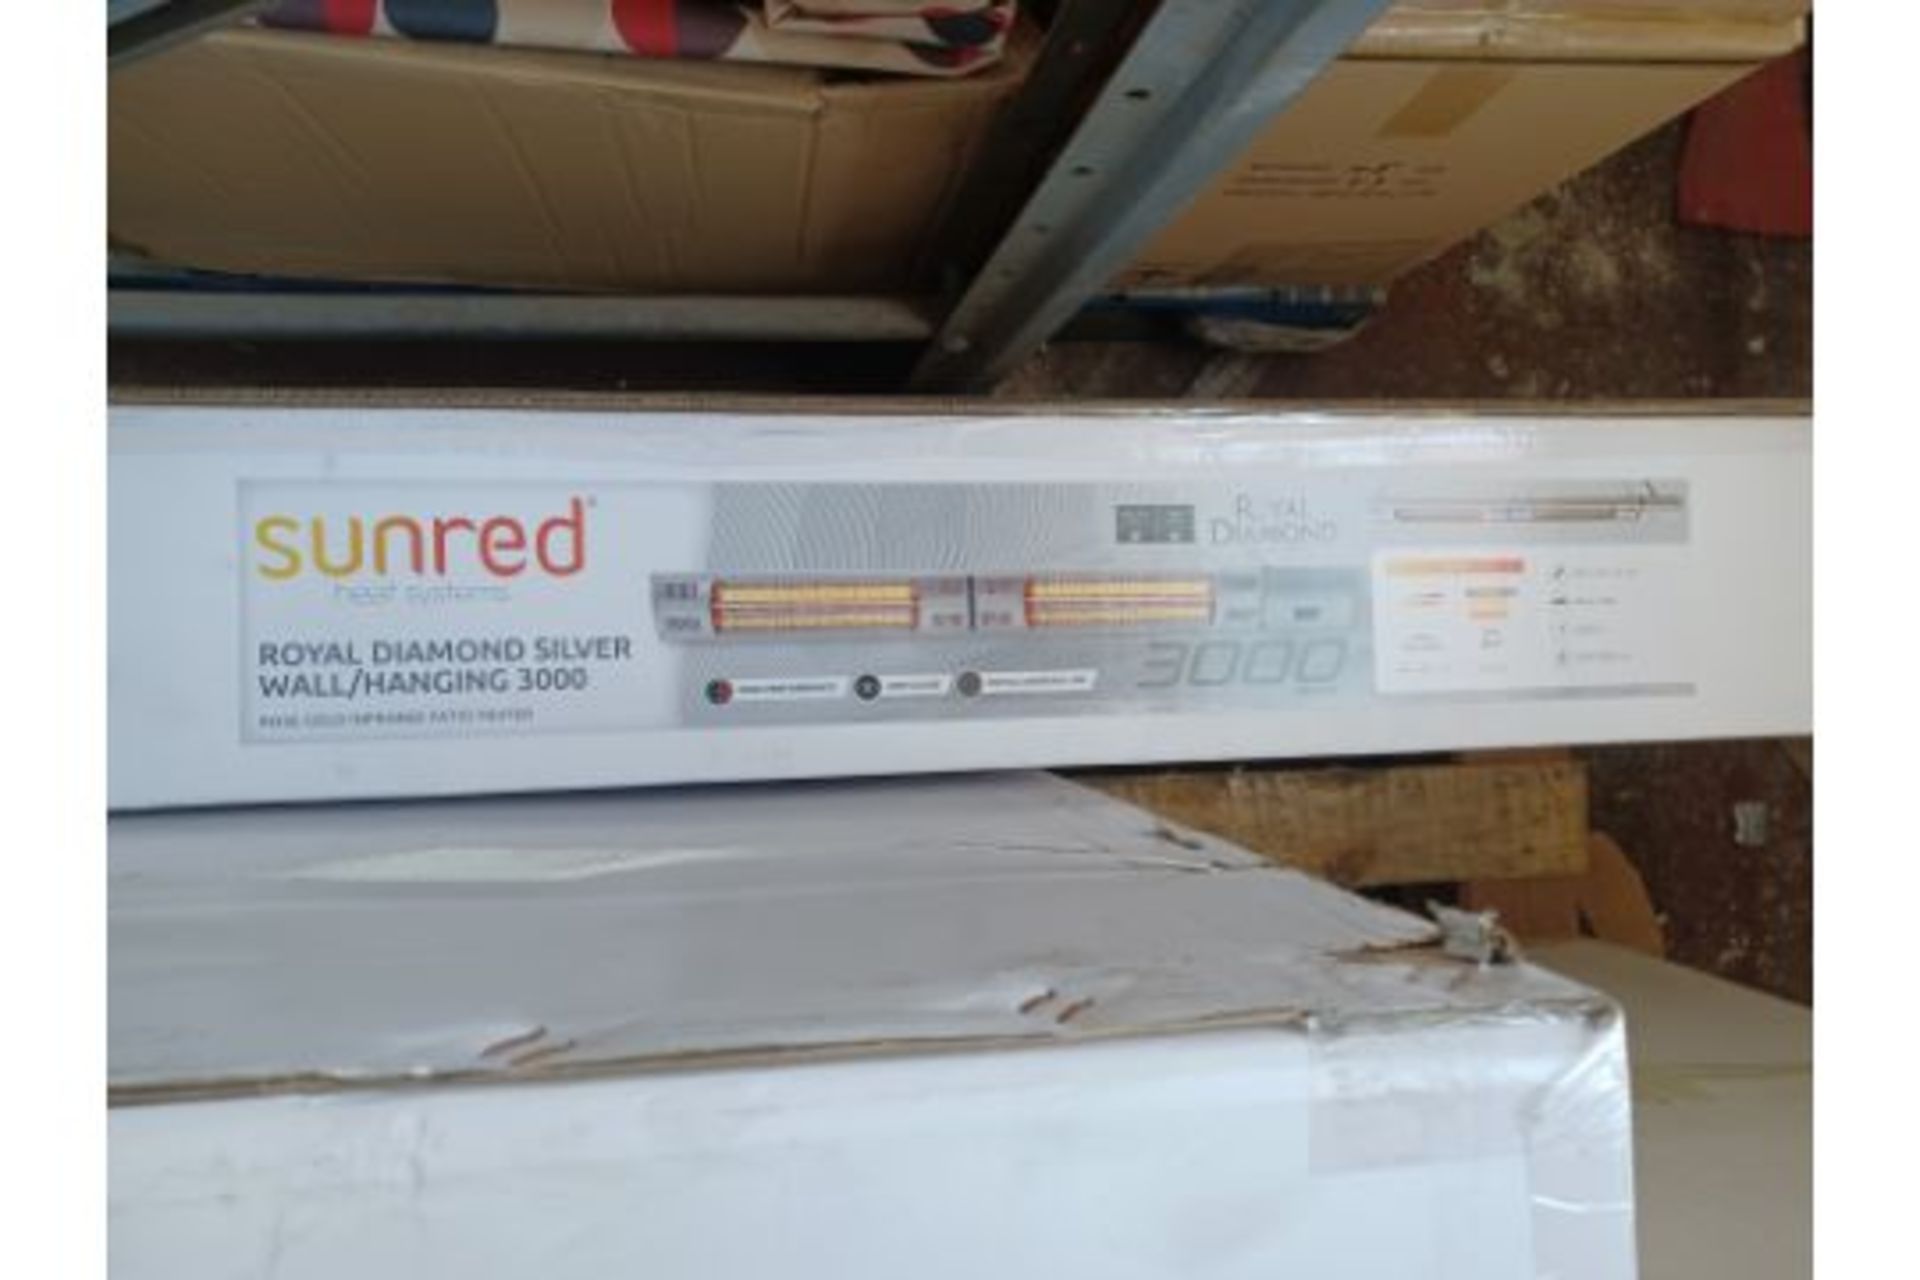 BRAND NEW SUNRED ULTRA HANGING/WALL HEATER SILVER 3000 RRP £449 R19-7